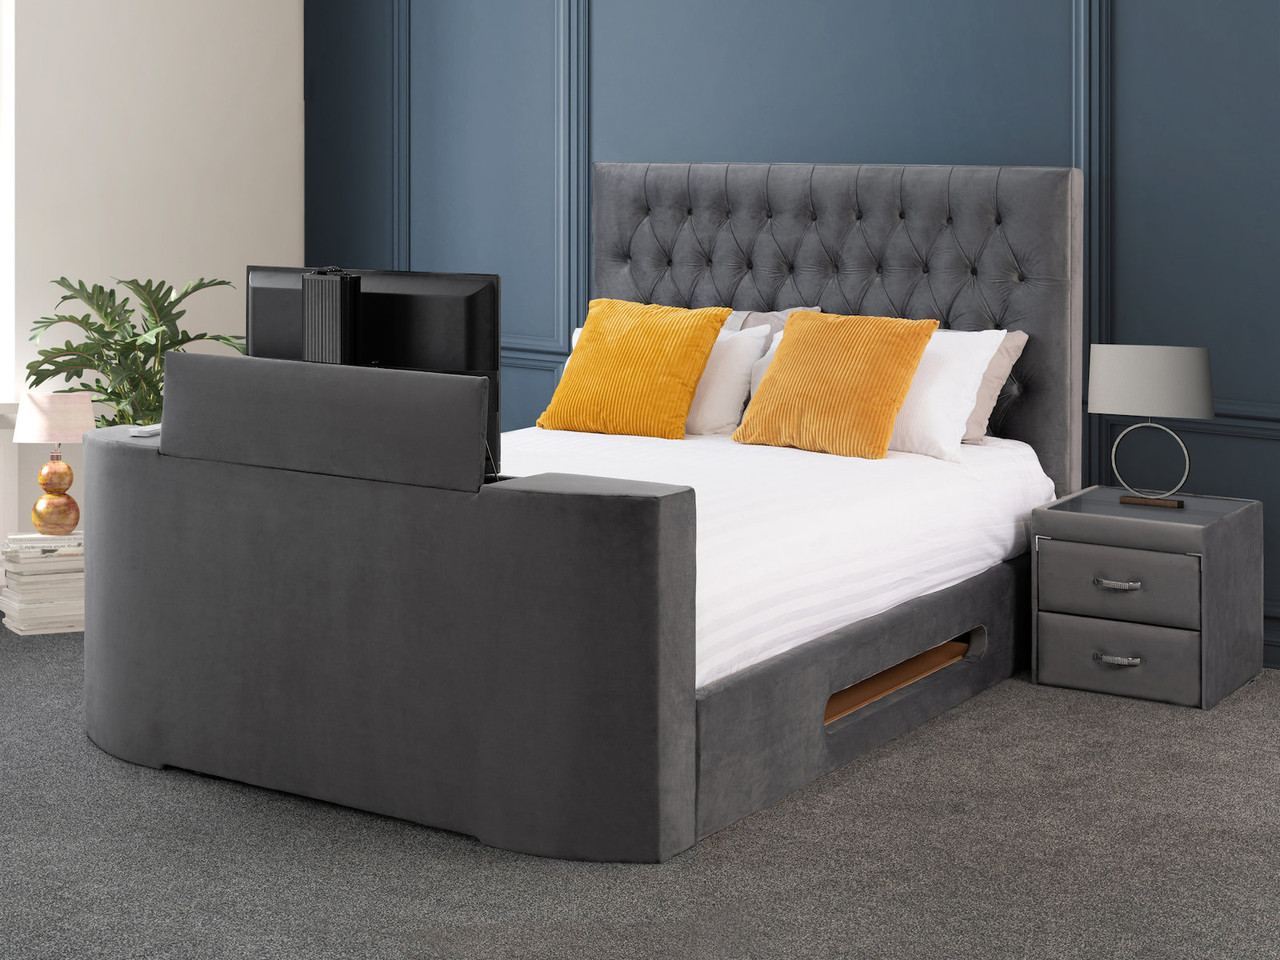 The Ariella Upholstered TV Media Bed Frame in Grey